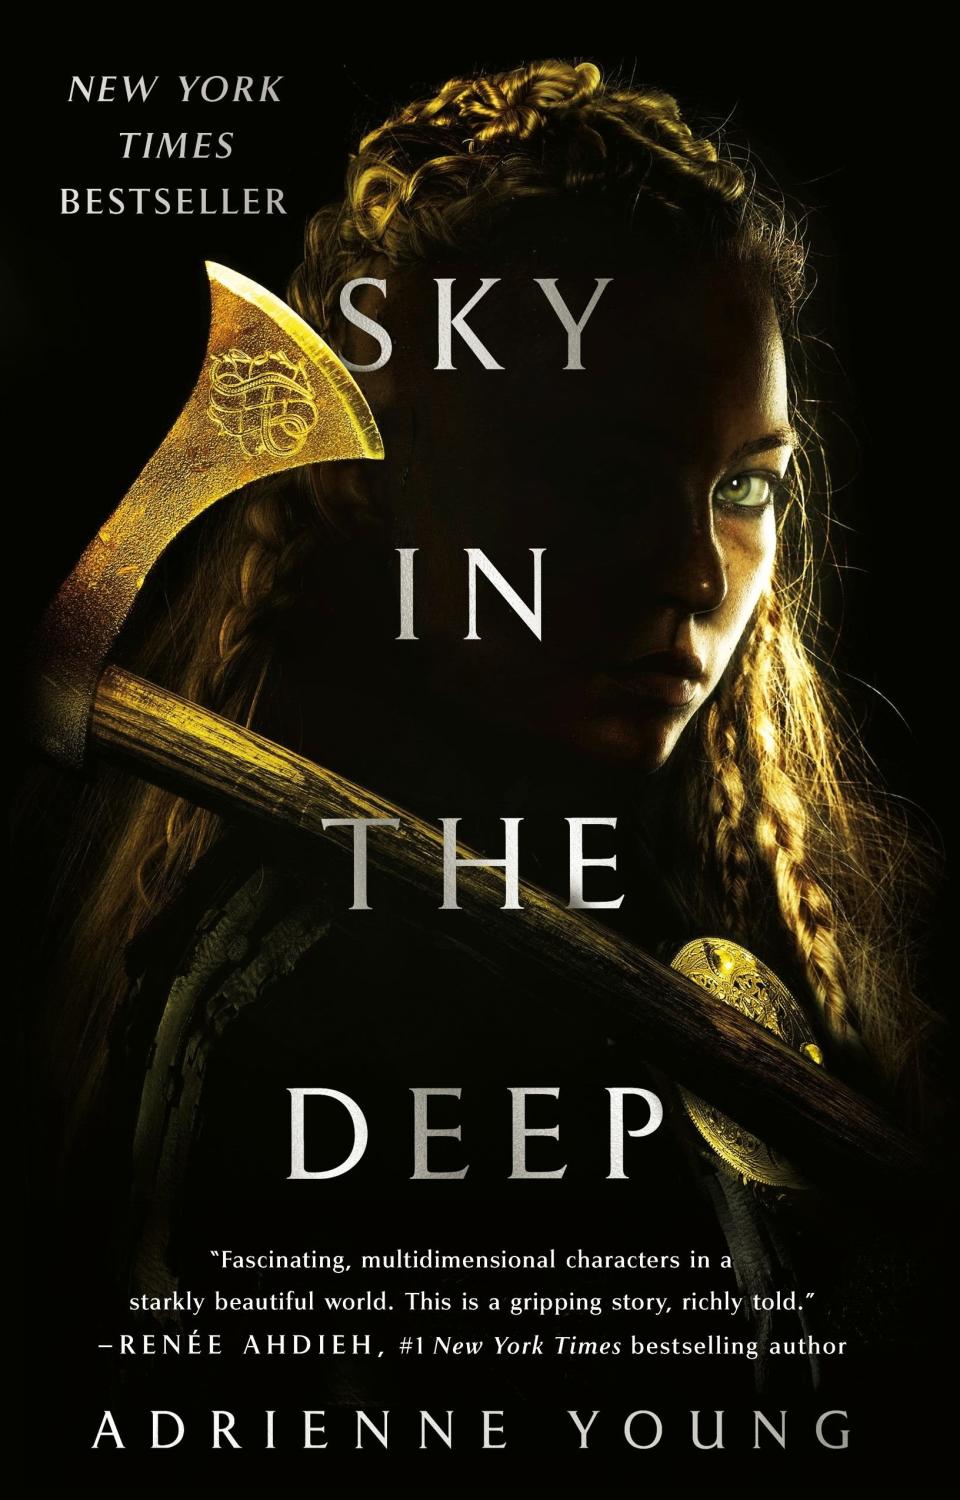 Sky In the Deep is a violently enchanting saga that follows 17-year-old Eelyn, a warrior who fights to protect her Aska people and her family. When she discovers that her beloved brother is fighting alongside the enemy, she is heartbroken. Her brother then kidnaps her, and while injured, she has to learn to fight with the enemy to survive and find a way to bring her family back together again. This book about trust, family, survival, and love isn't one to miss.